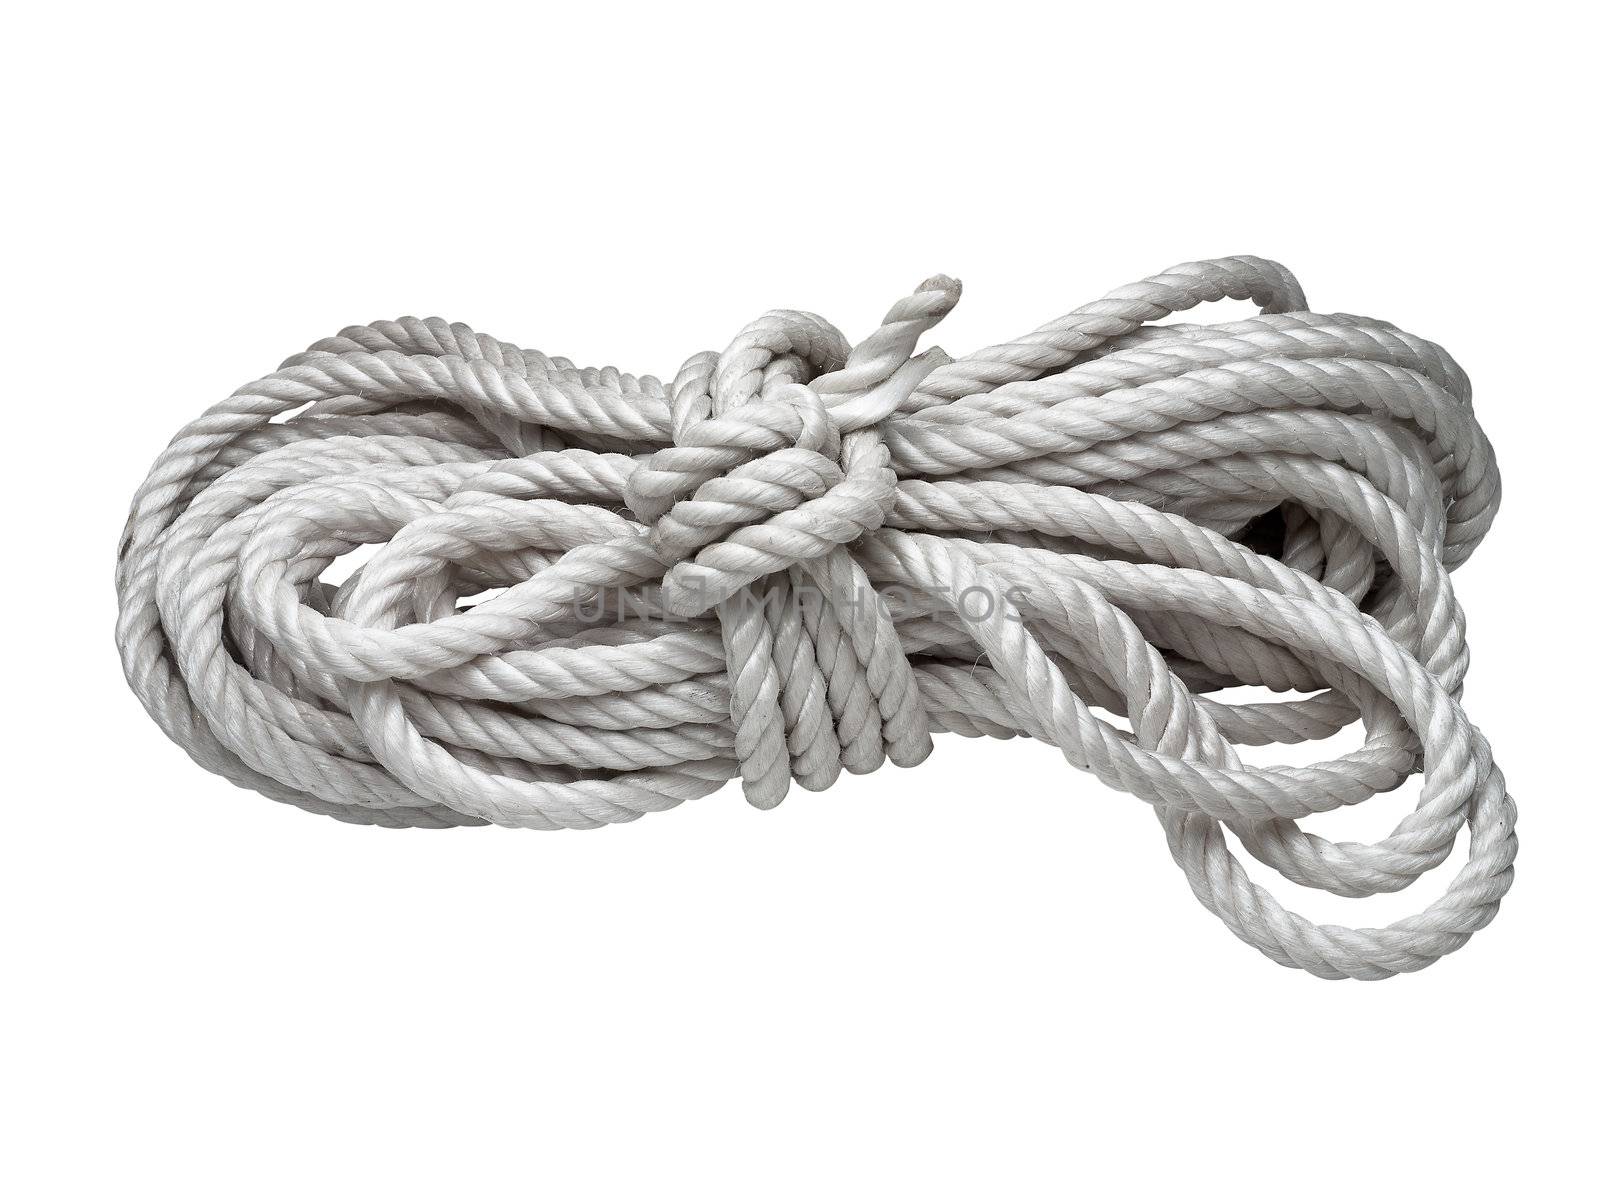 roll of rope isolated on white by pbombaert